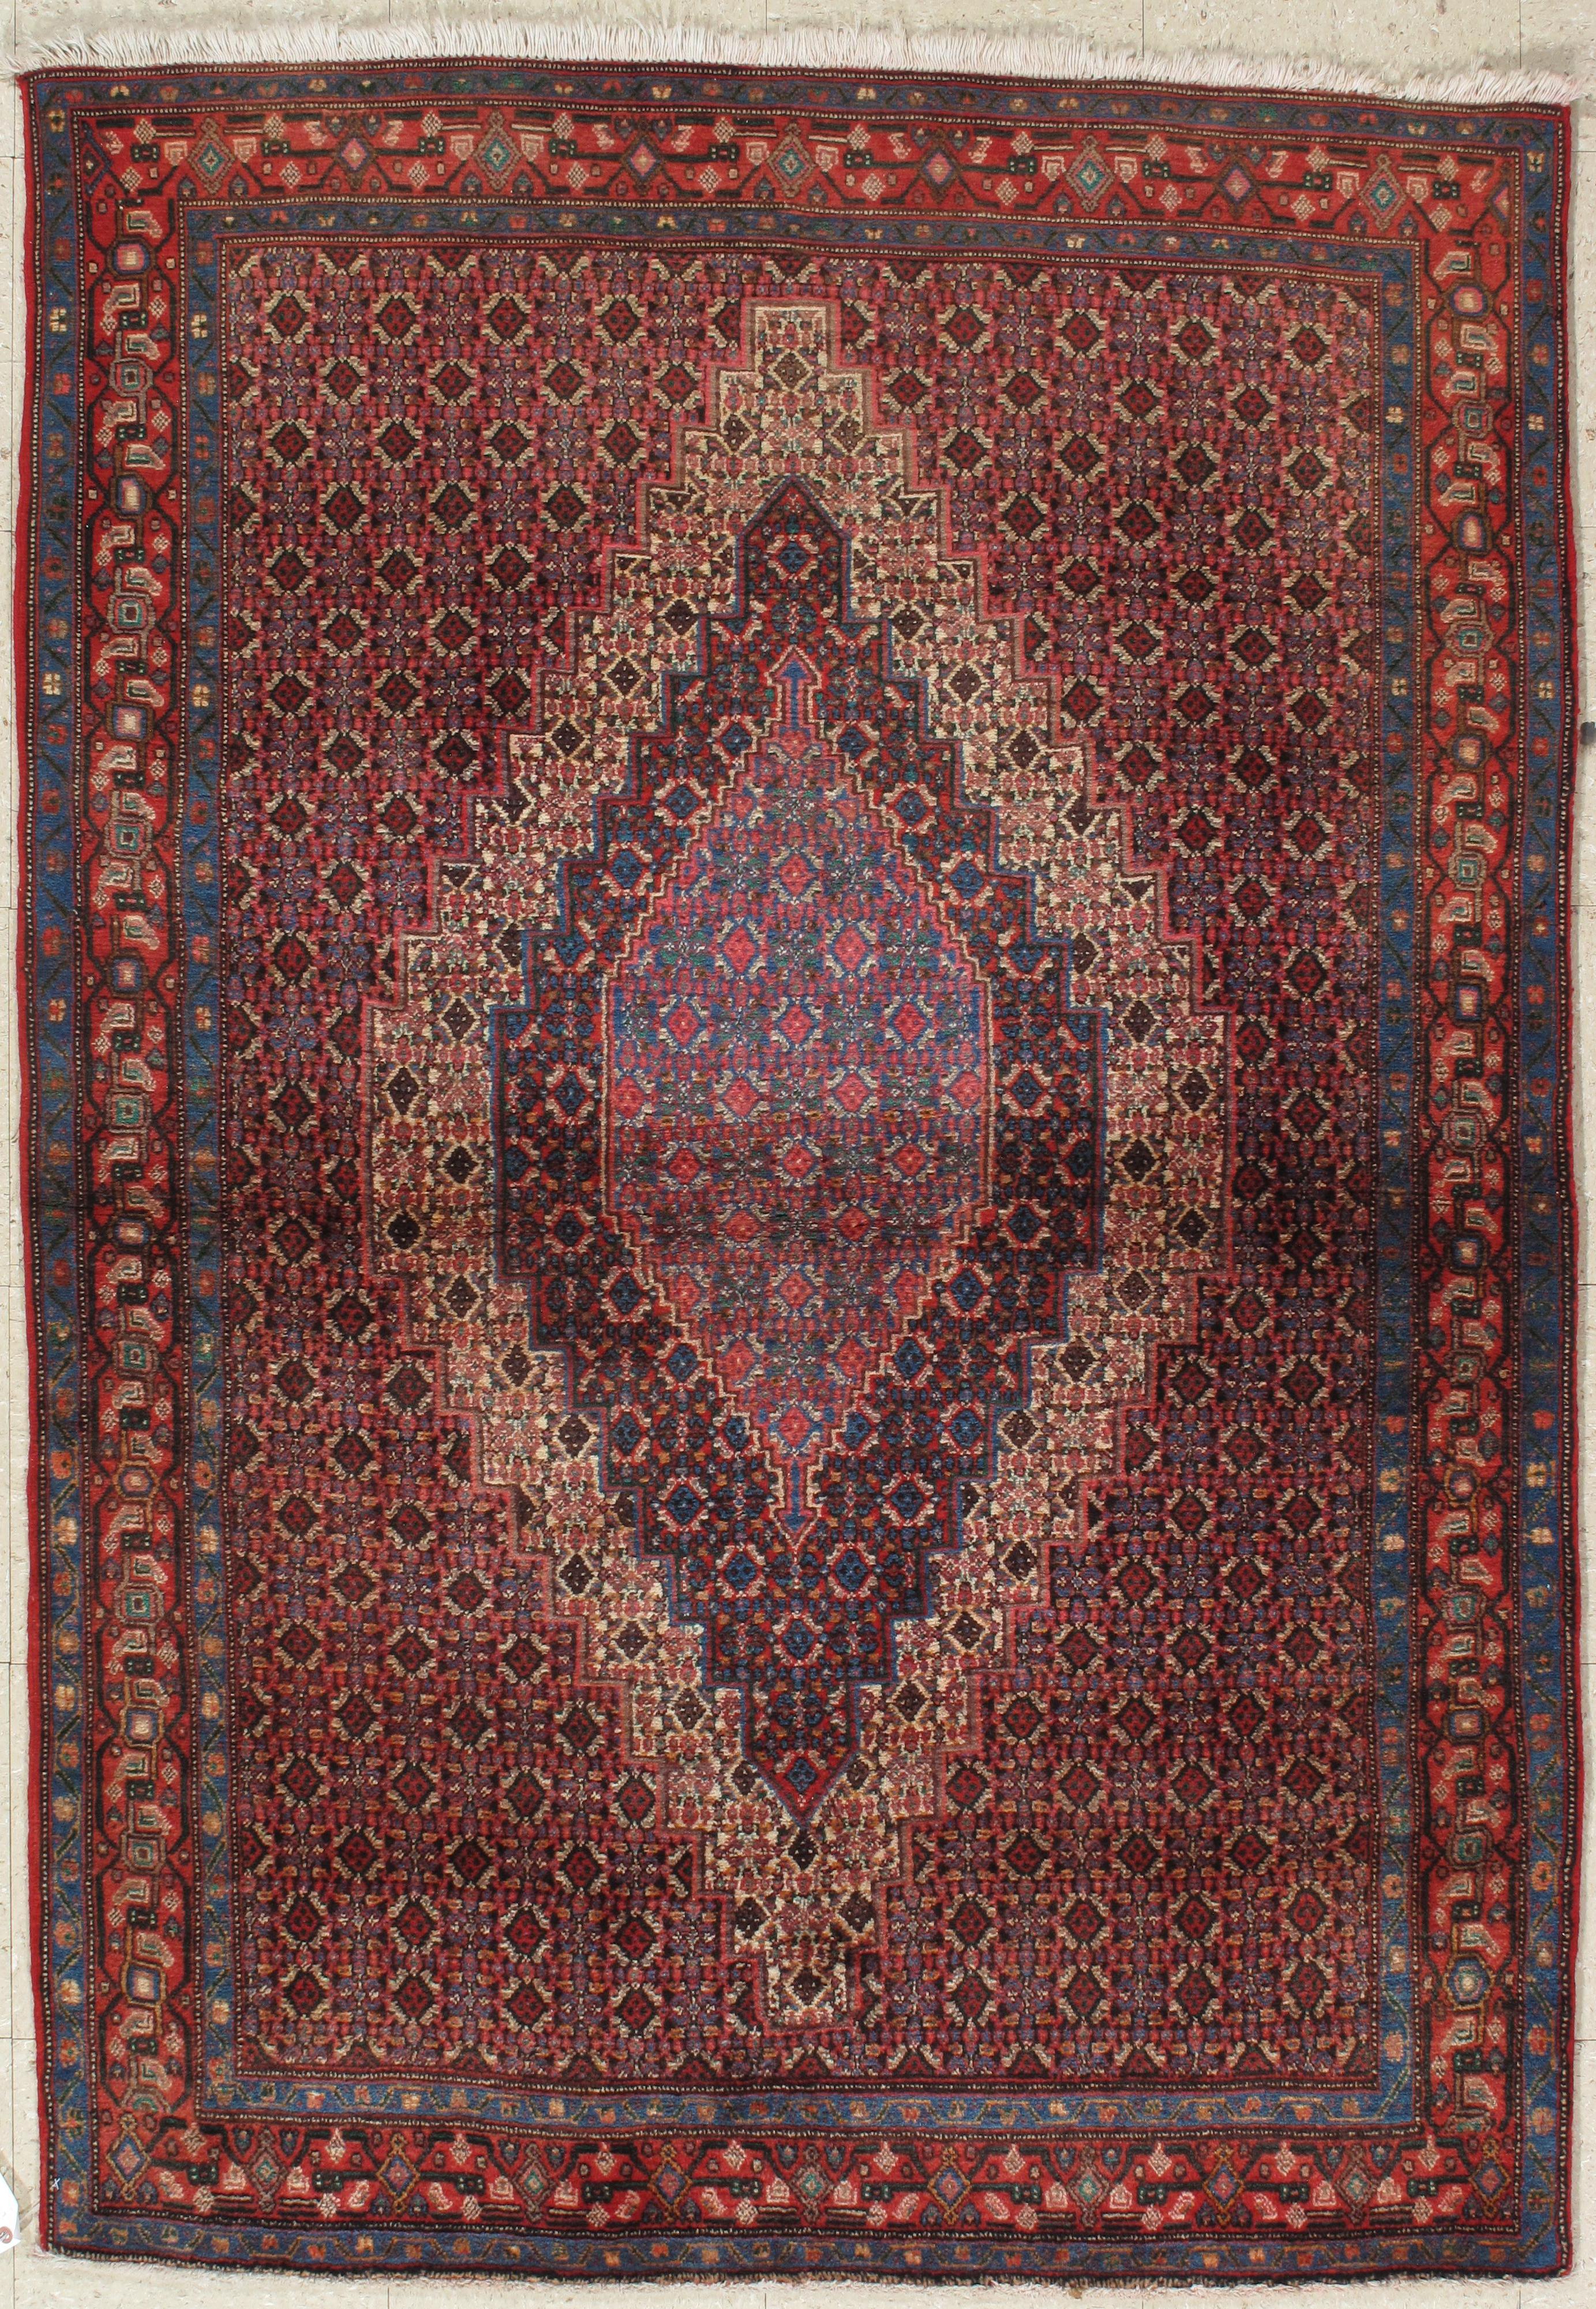 Antique Tabriz rugs are distinguished by their excellent weave and by their remarkable adherence to the classical traditions of Persian rug design. The city of Tabriz, situated in the Northwest region of Persia, was the earliest capital of the